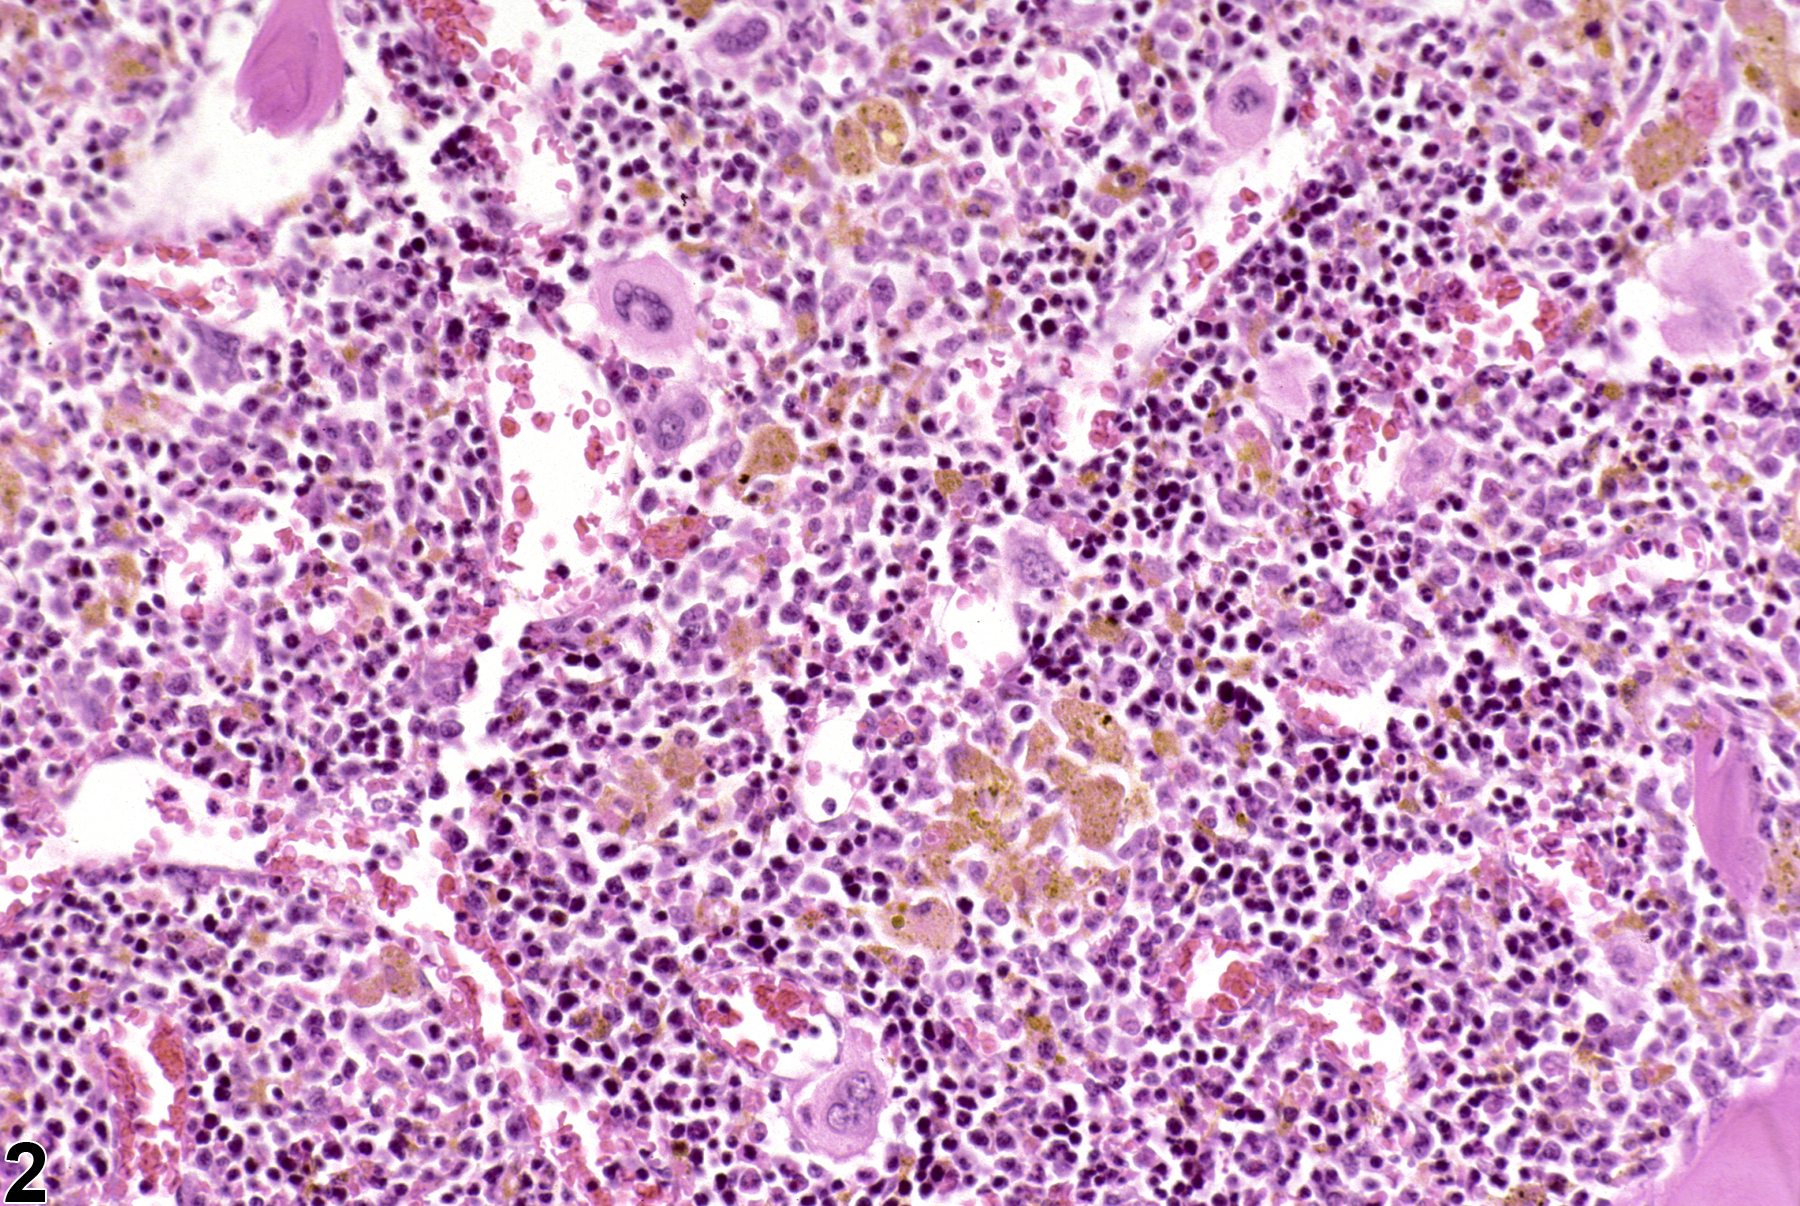 Image of pigment in the bone marrow from a male B6C3F1 mouse in a chronic study